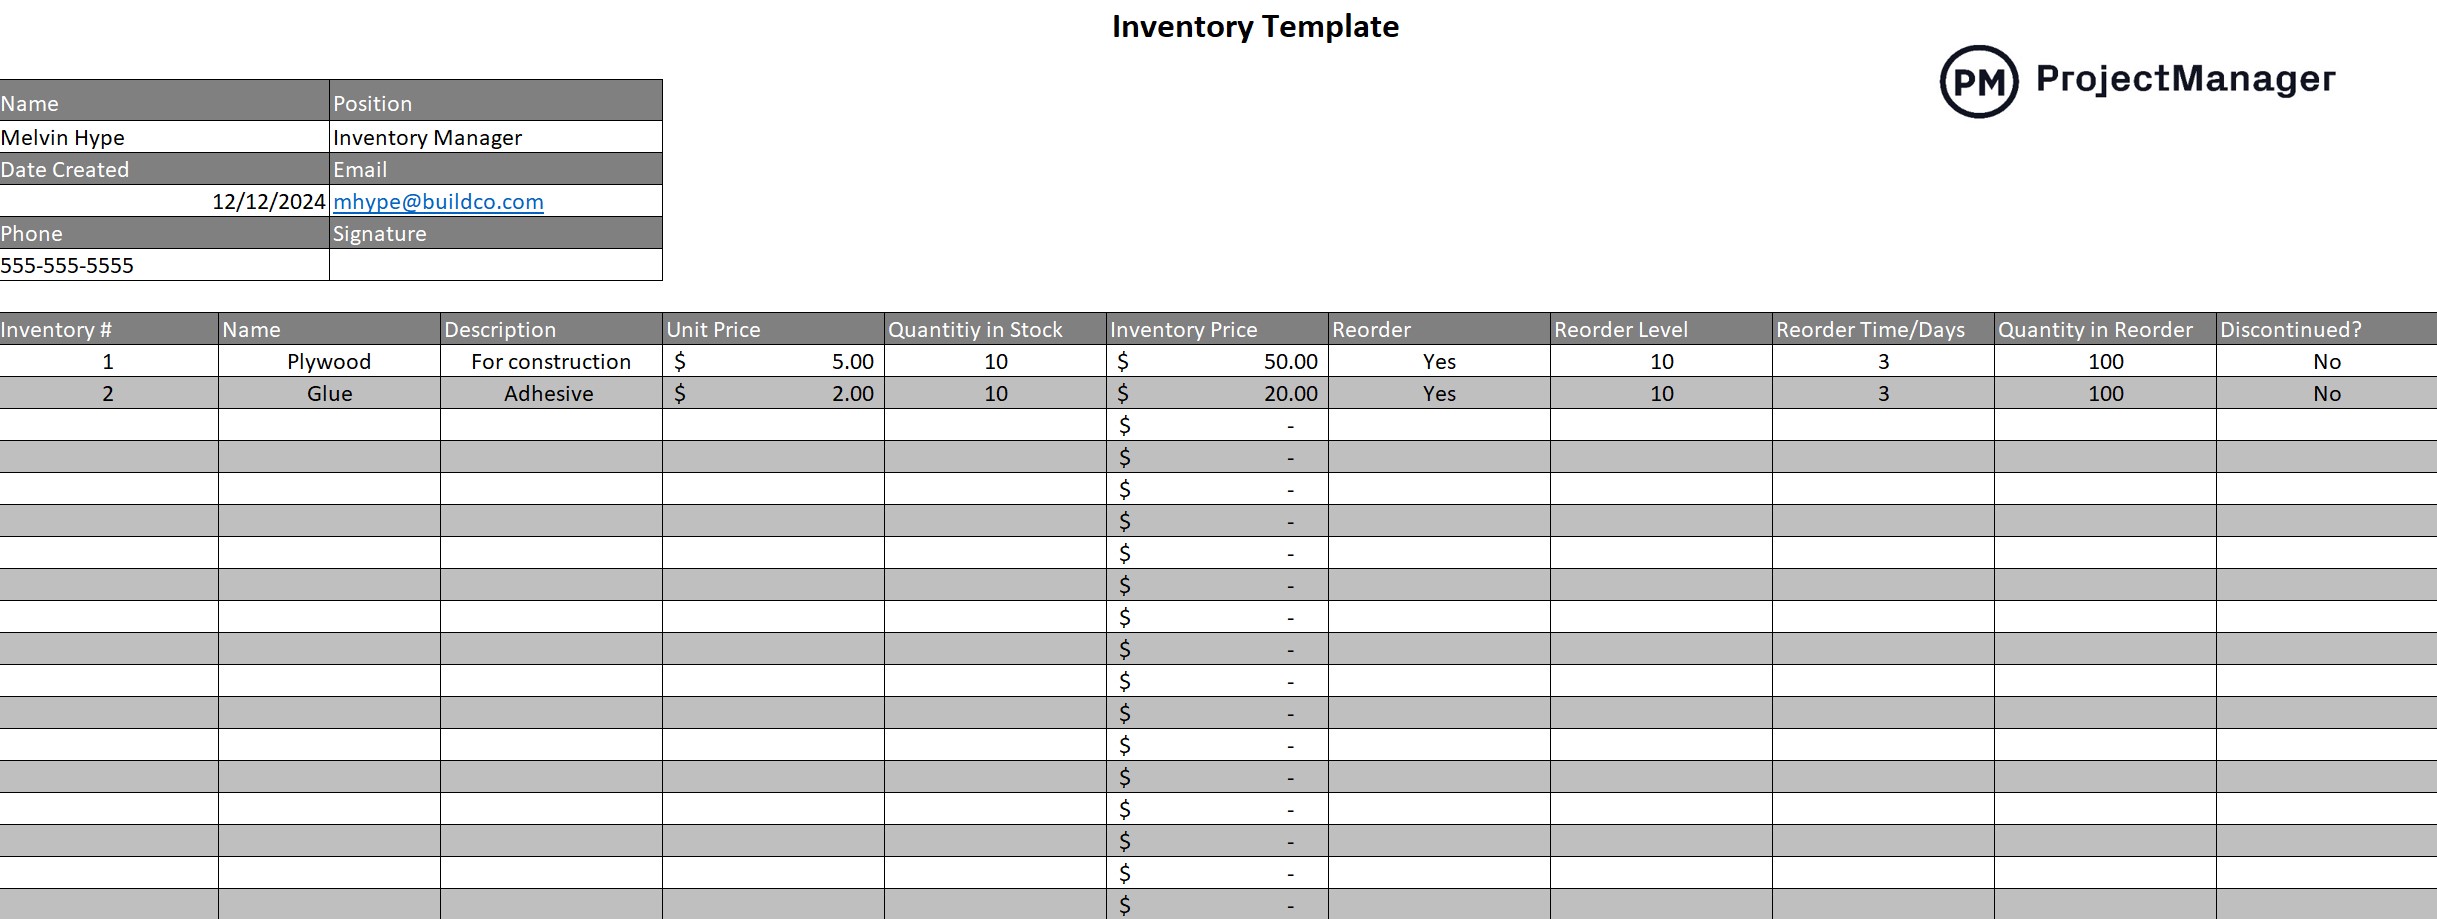 Google Sheets inventory template by ProjectManager